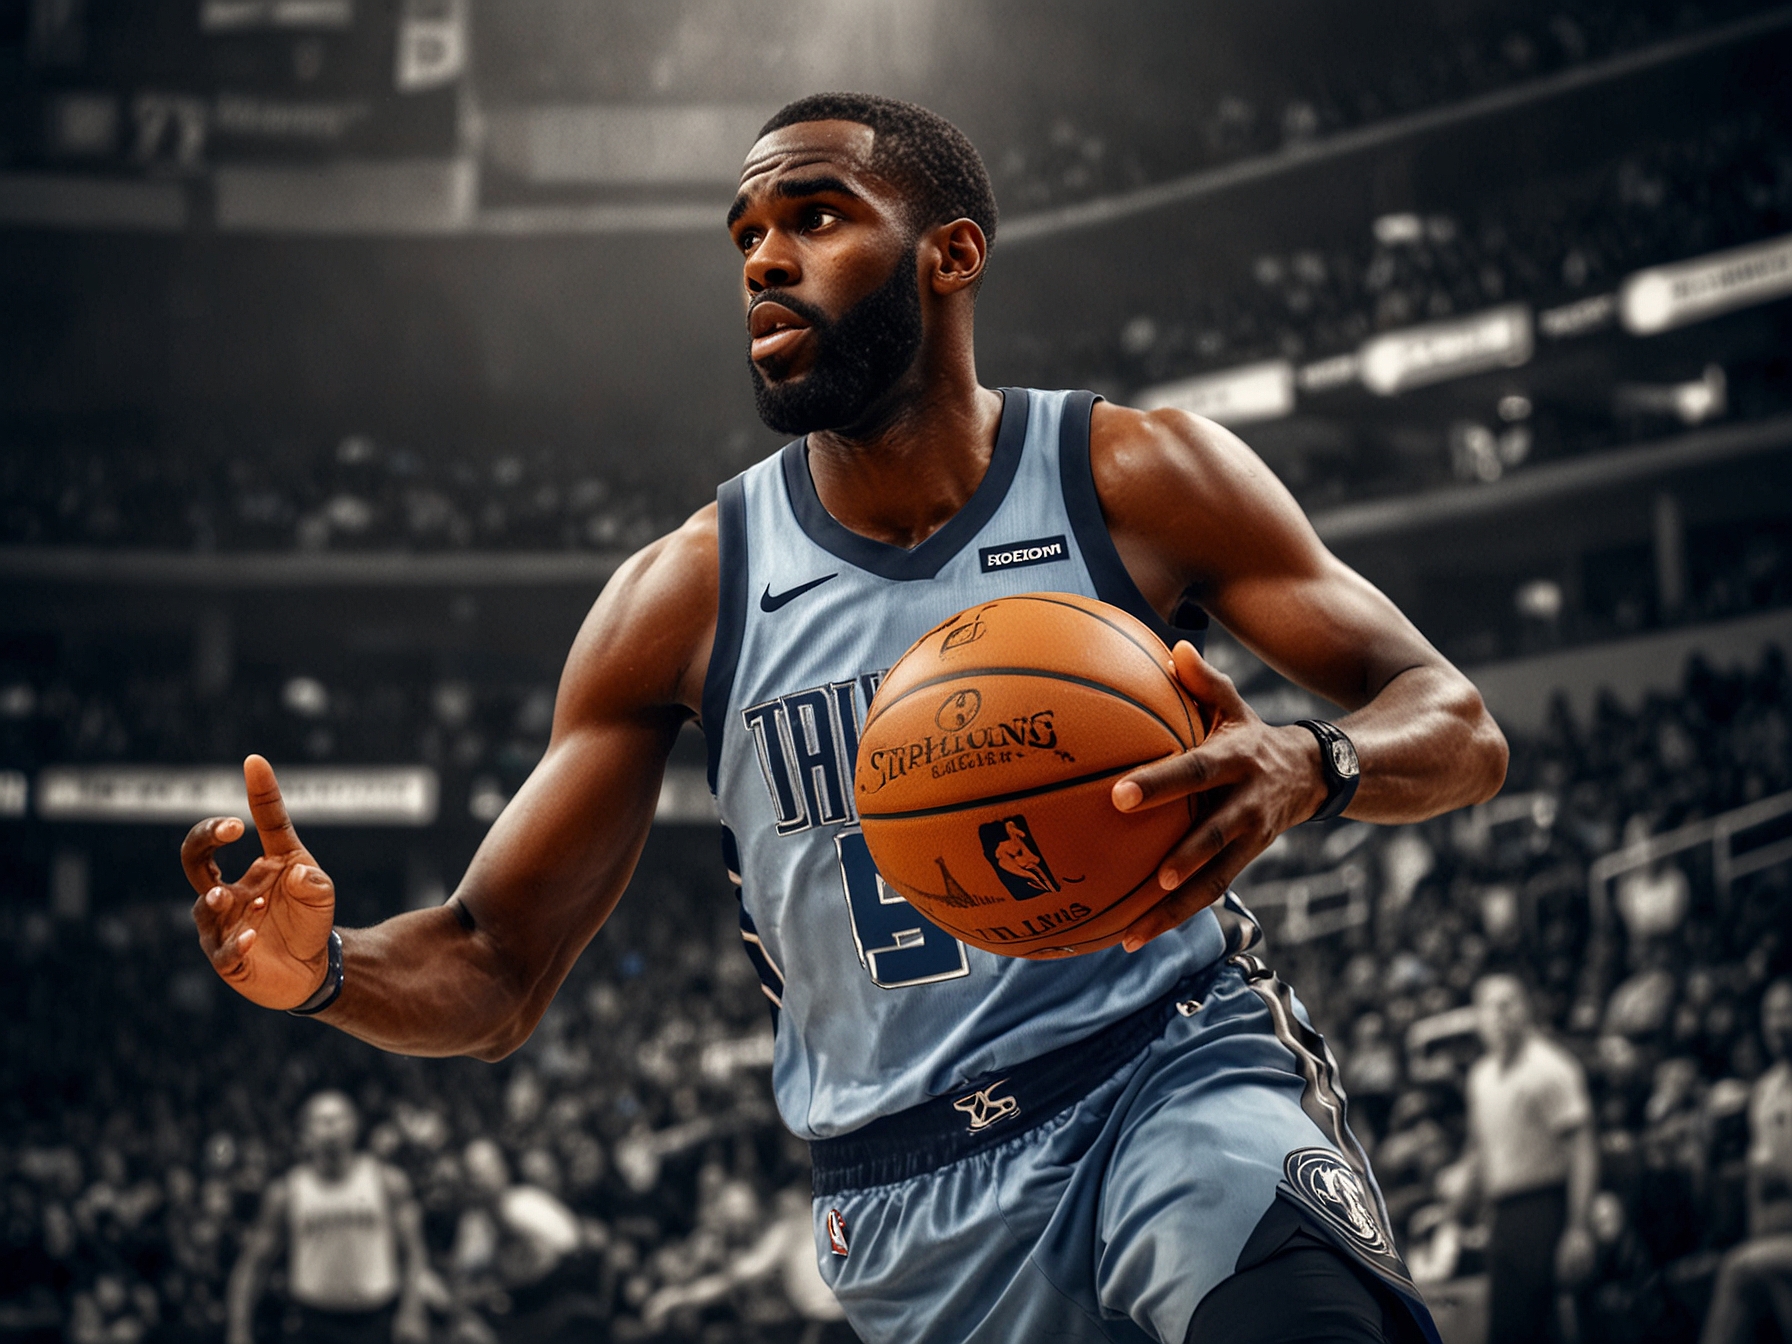 Tim Hardaway Jr. in action during an NBA game, showcasing his scoring abilities and crucial support for the Dallas Mavericks, emphasizing his impact on the team's performance.